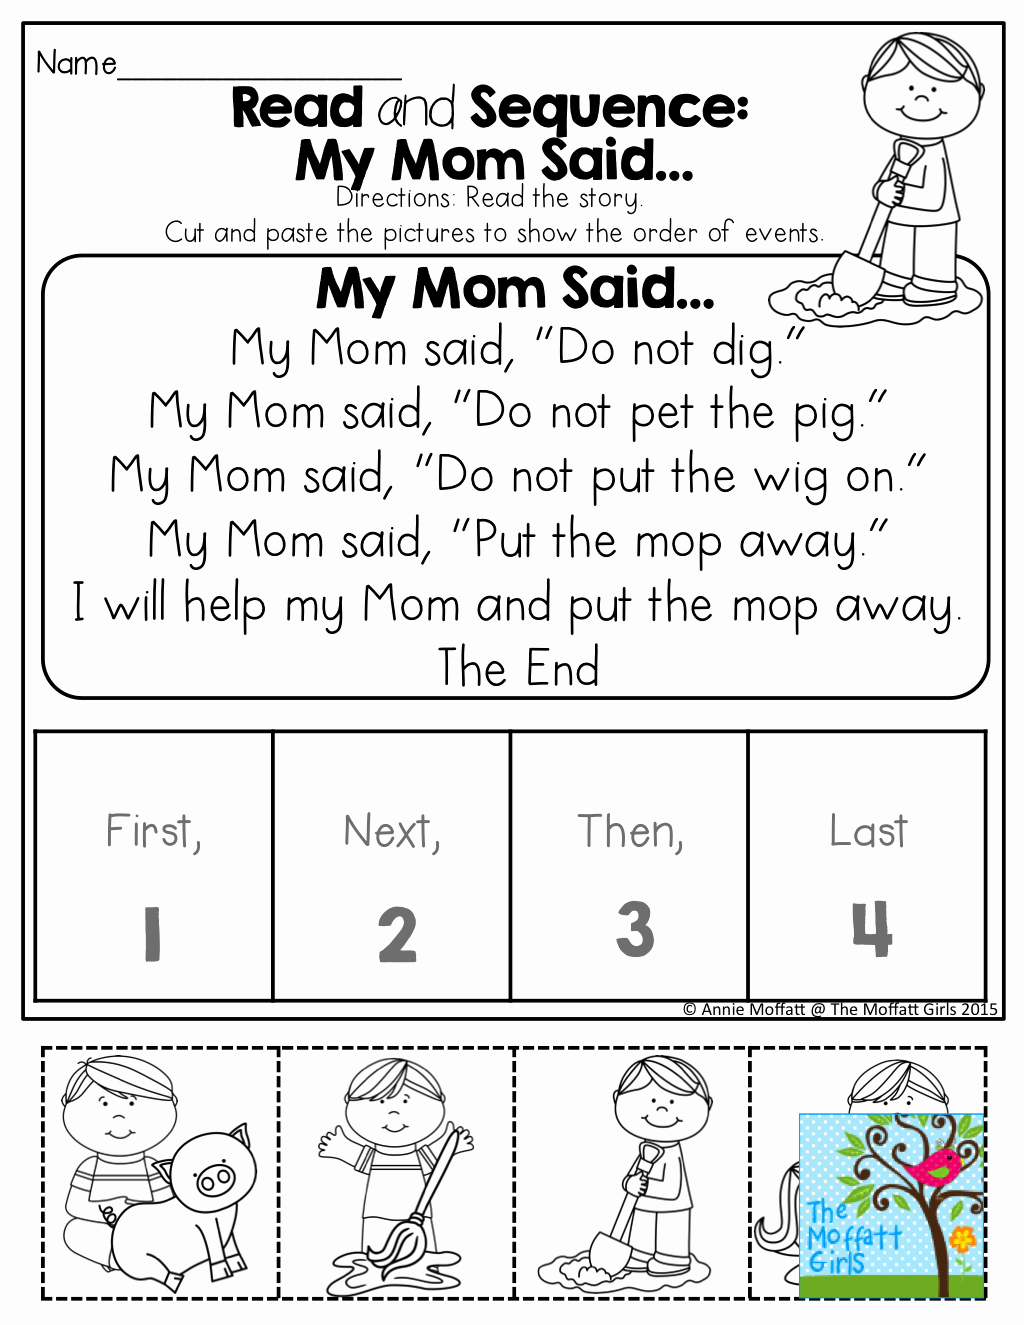 Sequencing Story Worksheets Beautiful Pin On Reading